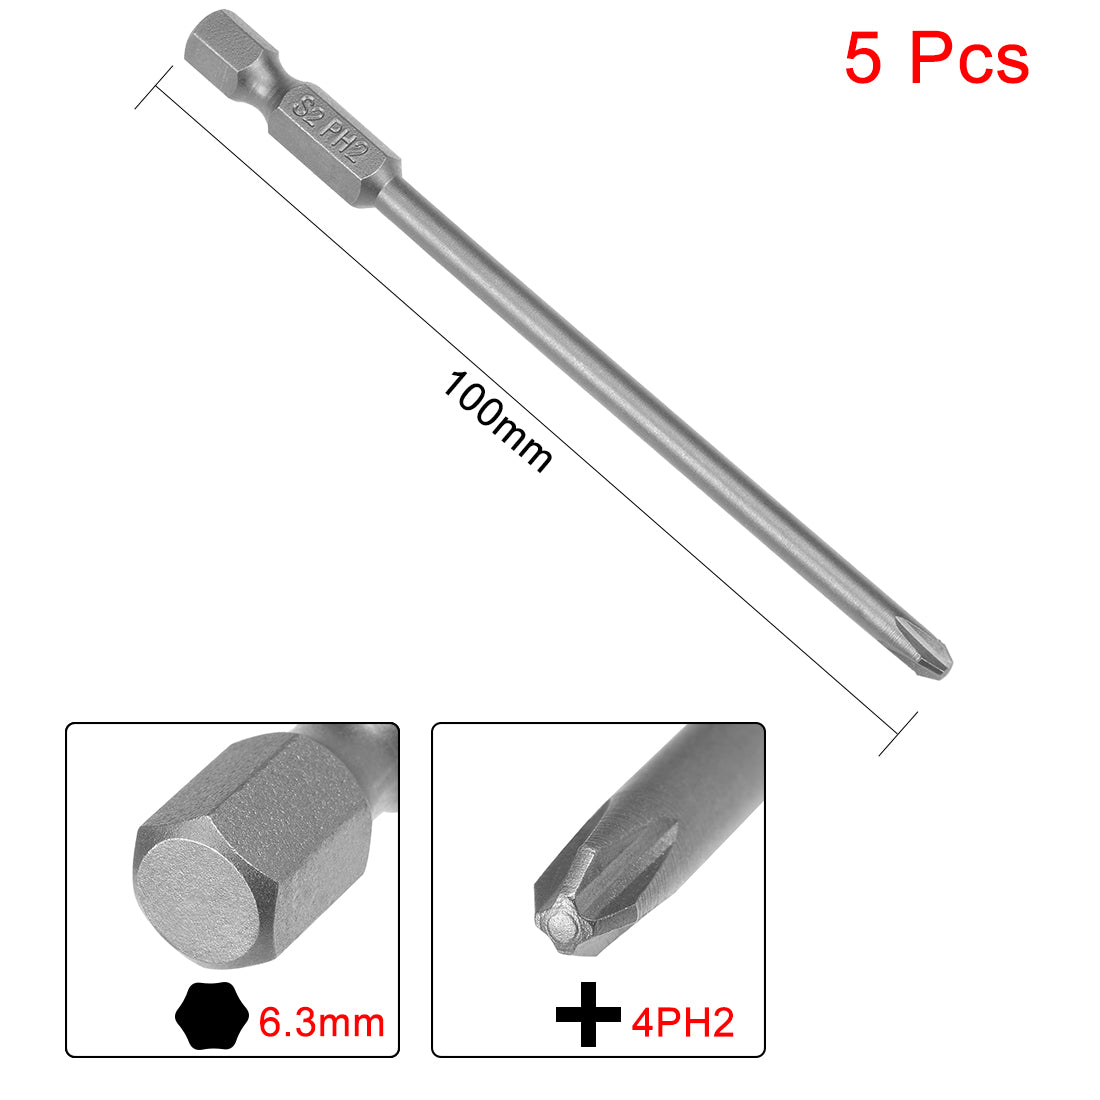 Uxcell Uxcell 5pcs 100mm 1/4" Hex Shank 4mm Magnetic Phillips Head Screwdriver Bits S2